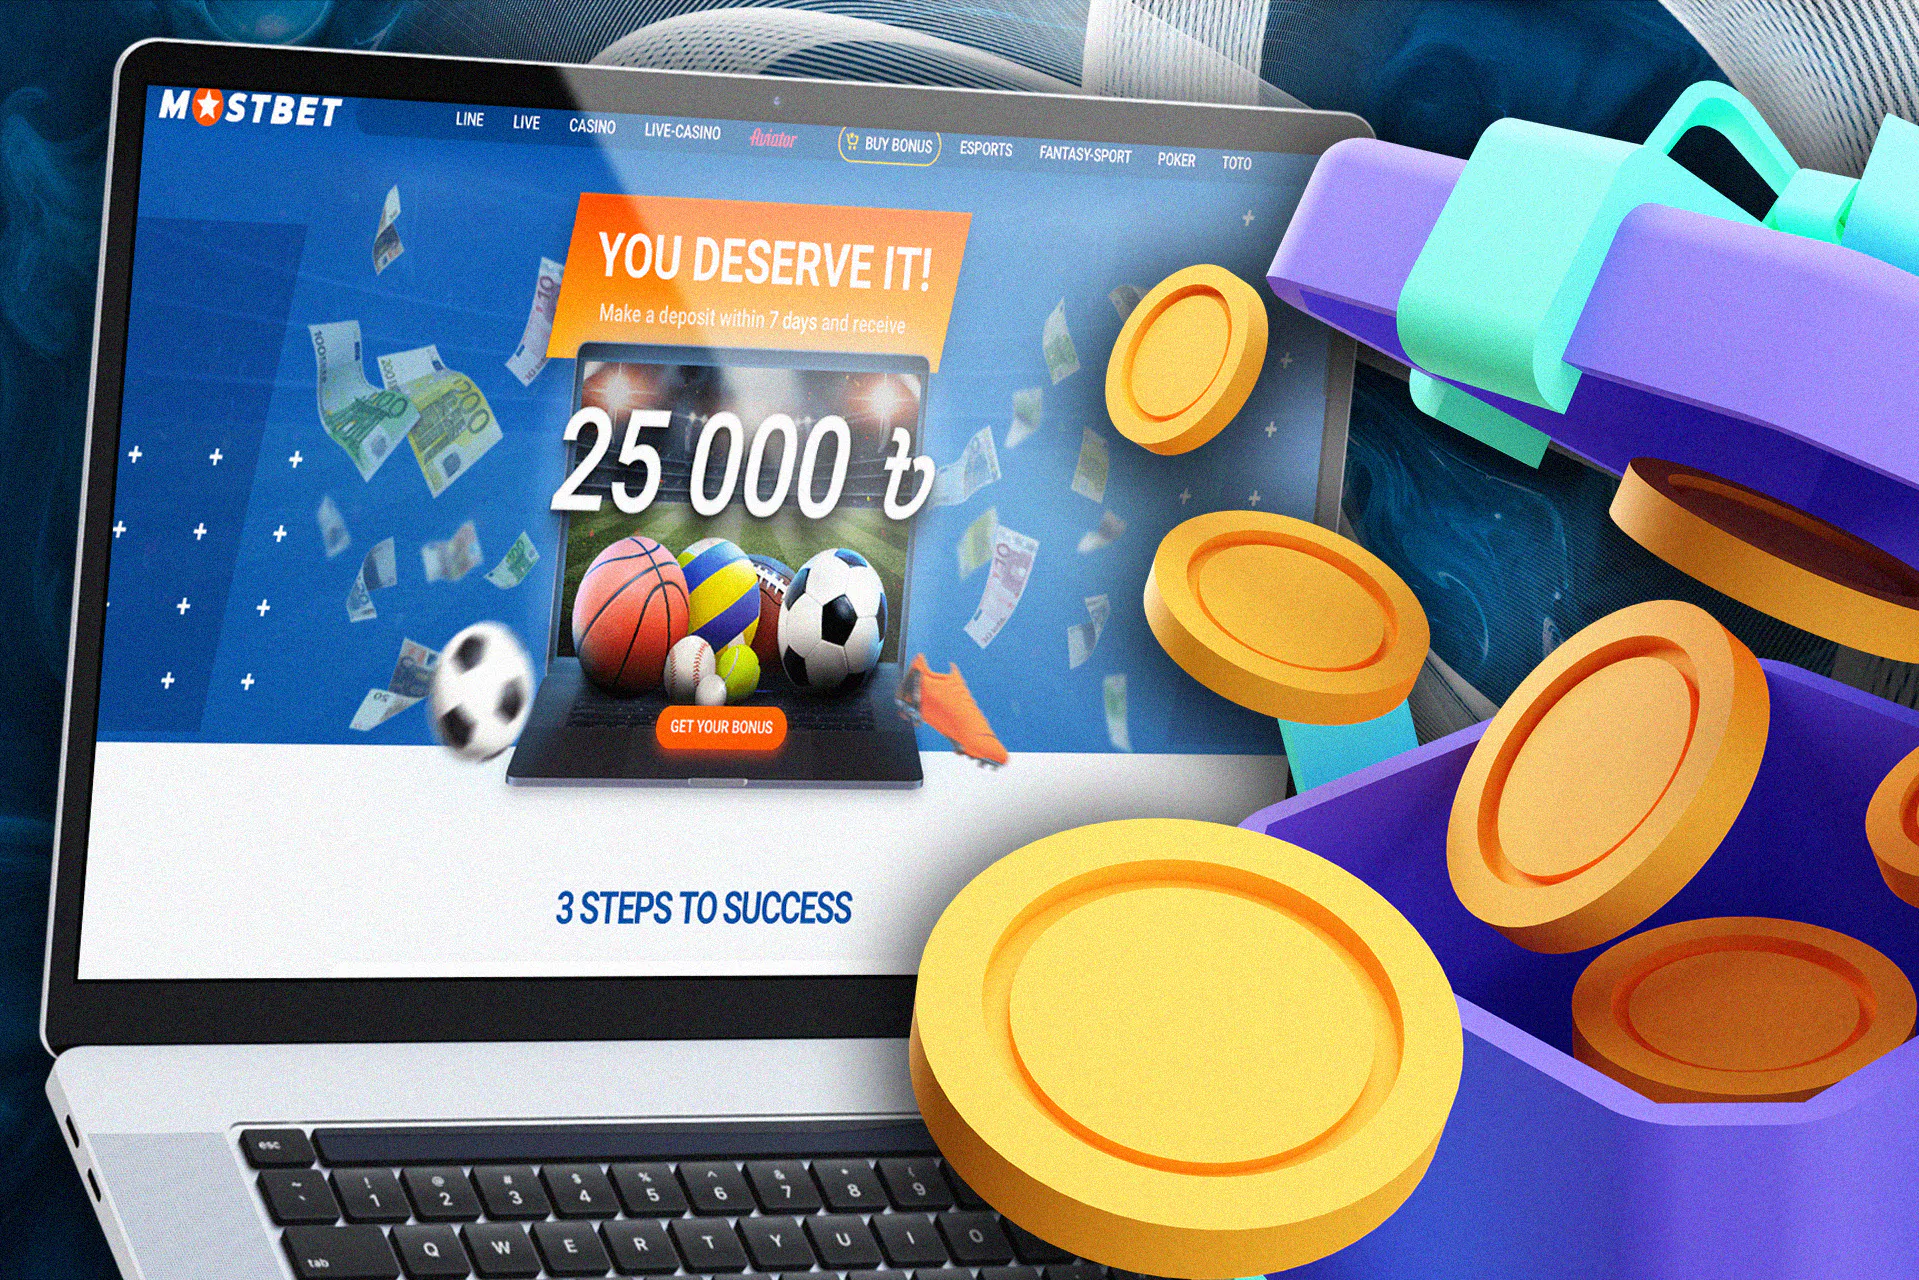 Welcome bonus 25,000 BDT on sports betting, 3 steps to success.